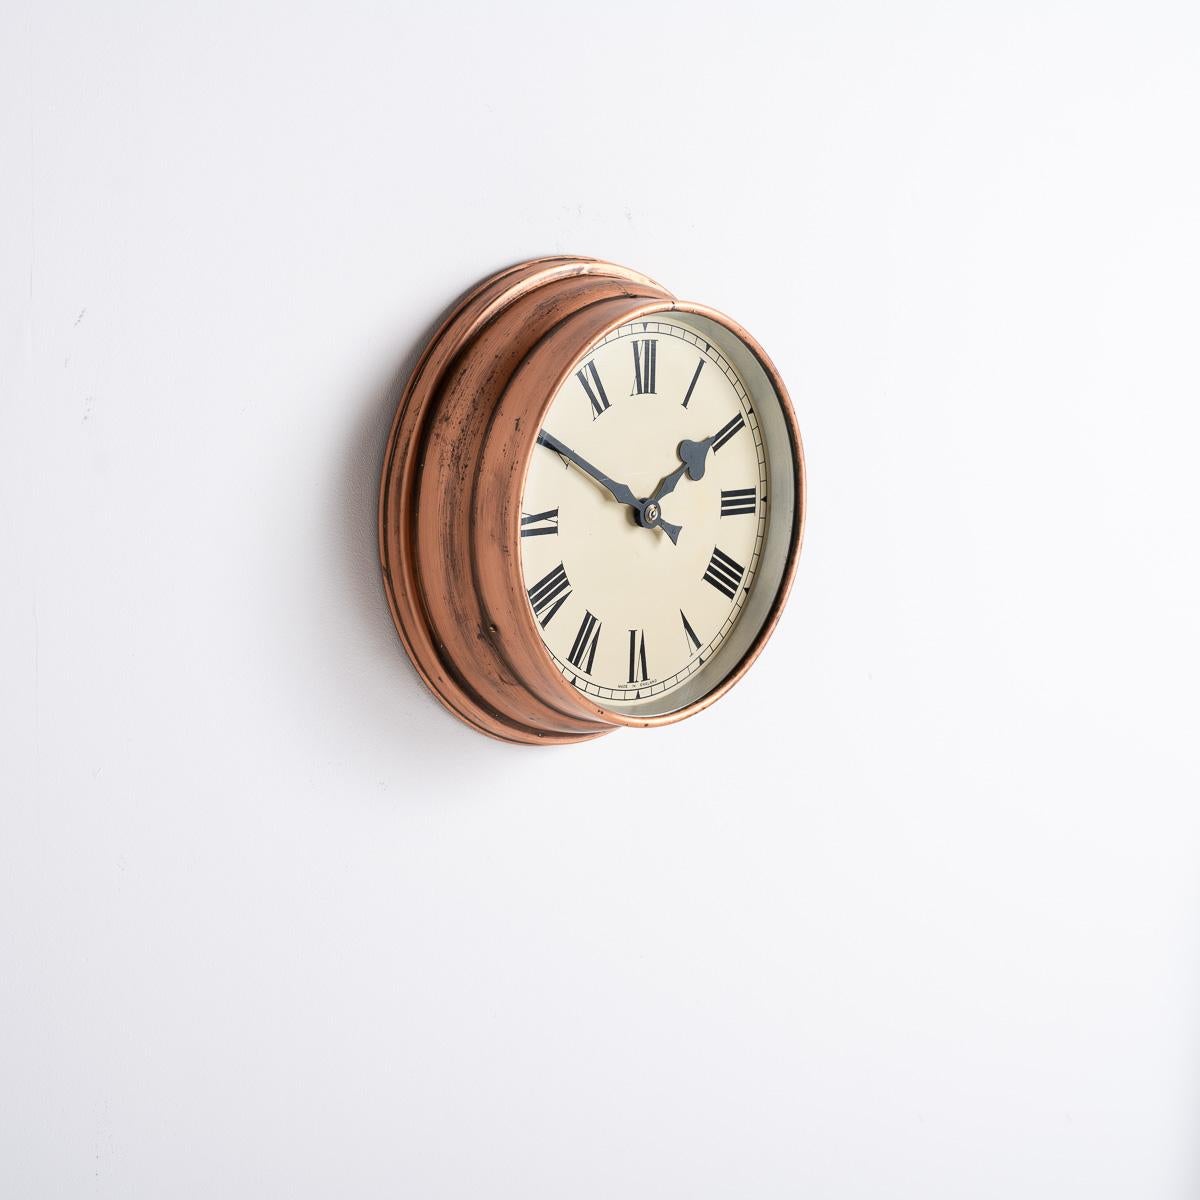 Reclaimed Industrial Aged Spun Copper Case Wall Clock By Synchronome 7